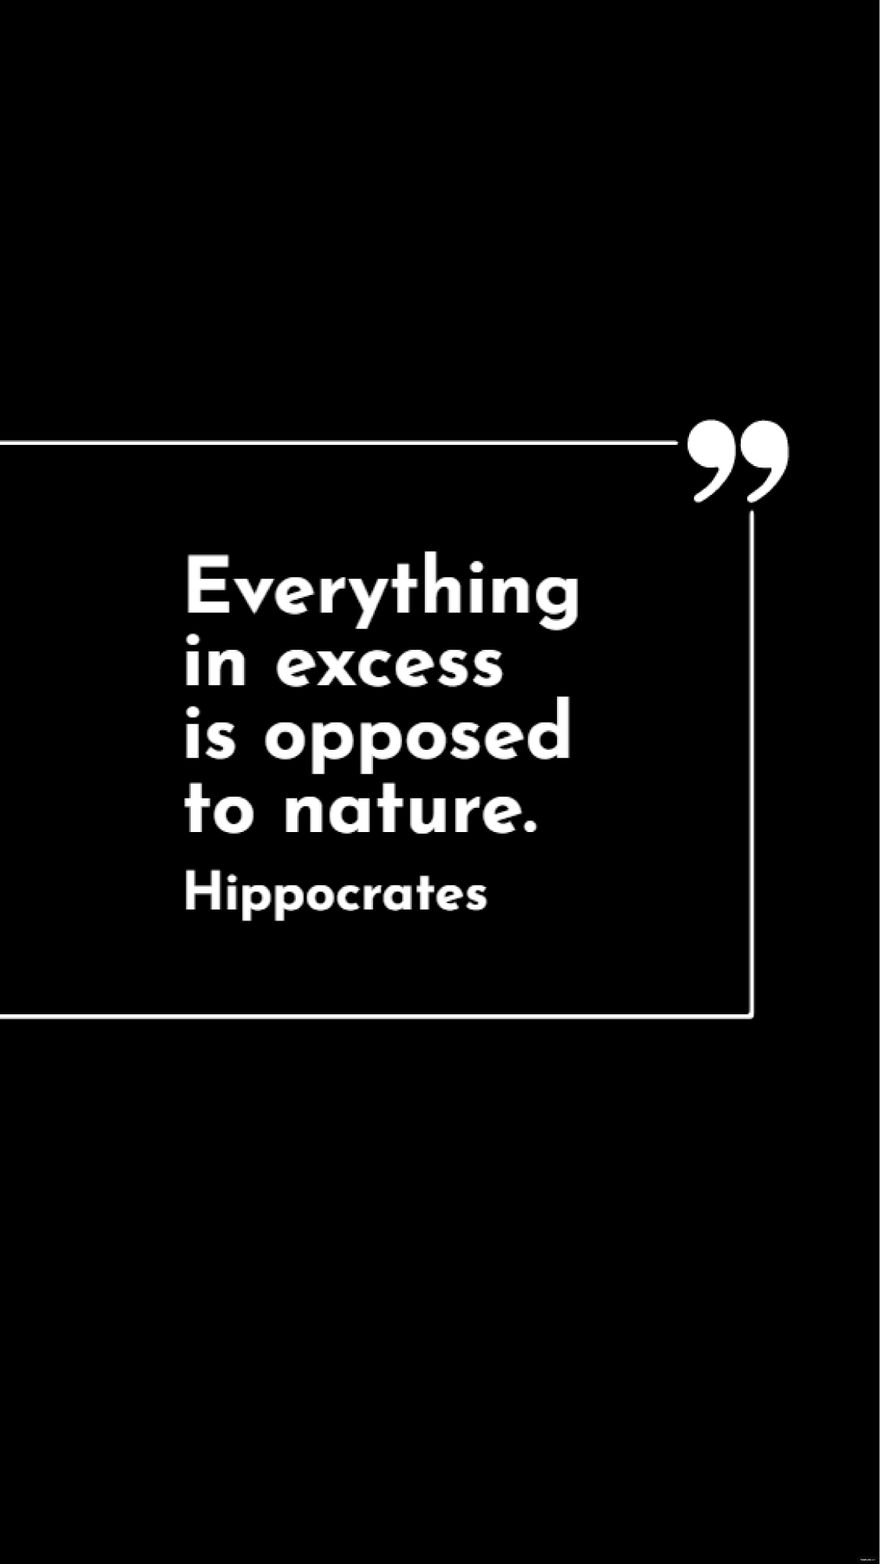 Hippocrates - Everything in excess is opposed to nature. in JPG